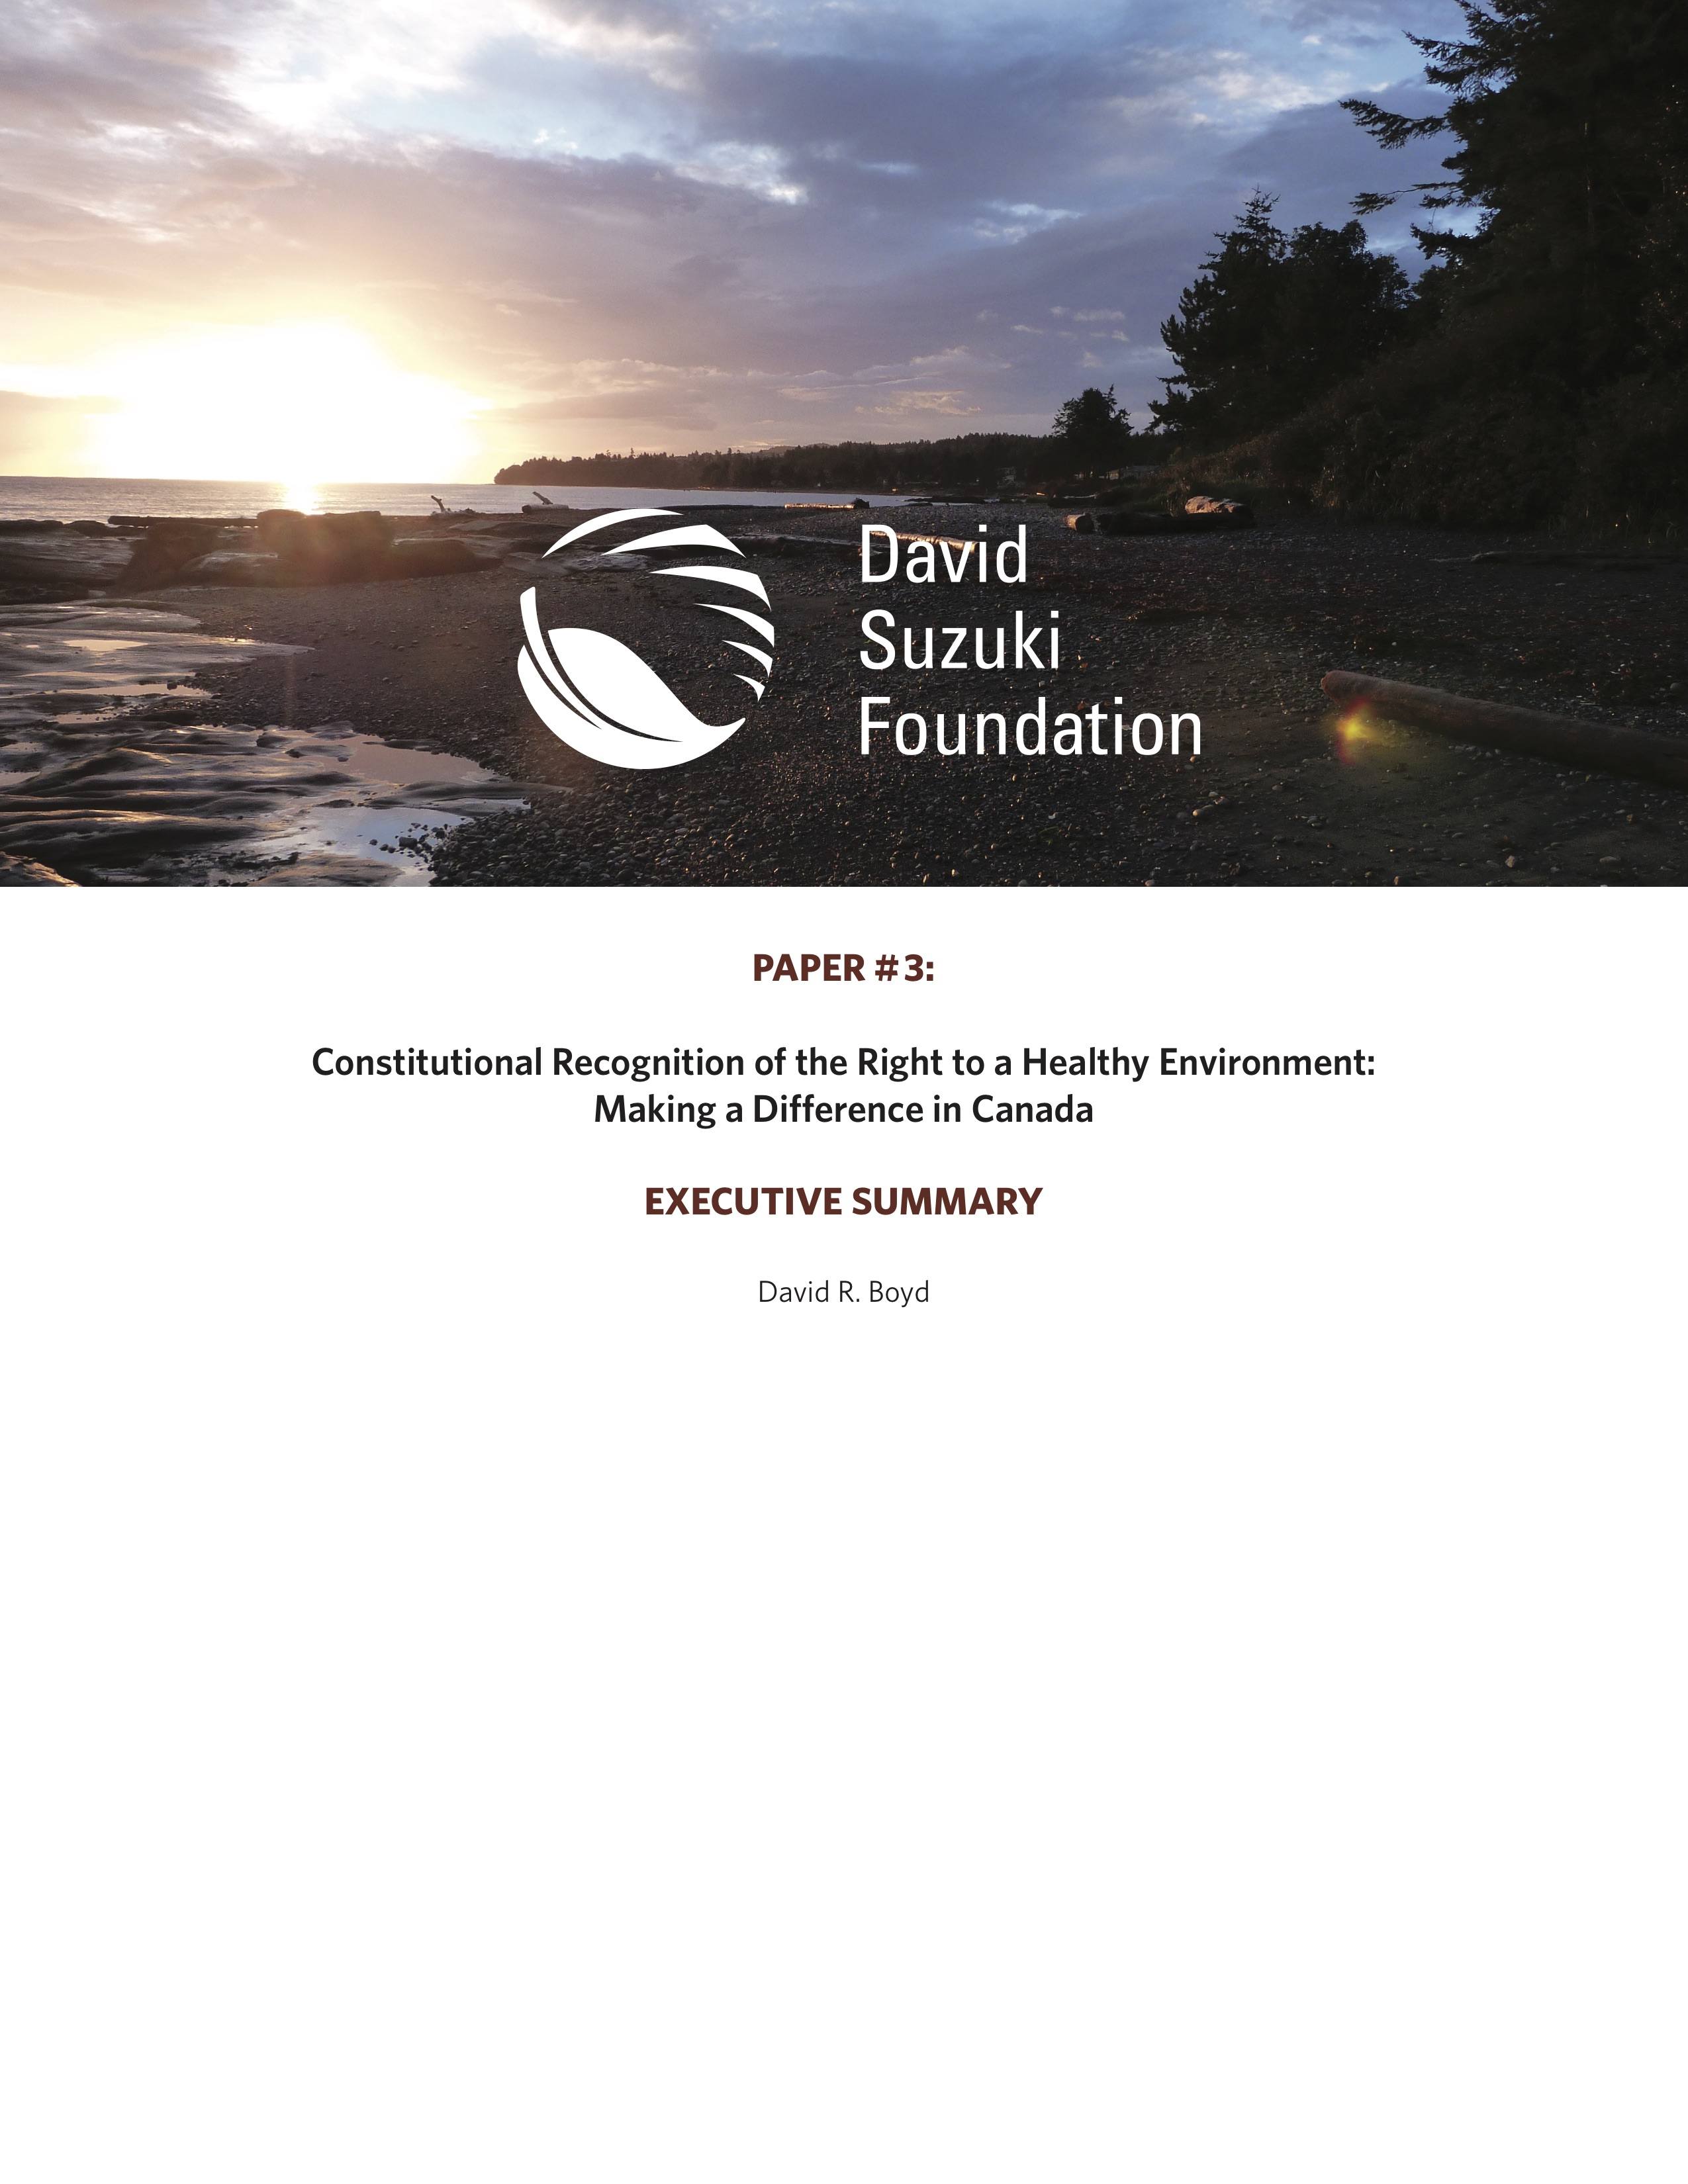 EXECUTIVE SUMMARY — Constitutional Recognition of the Right to a Healthy Environment: Making a Difference in Canada